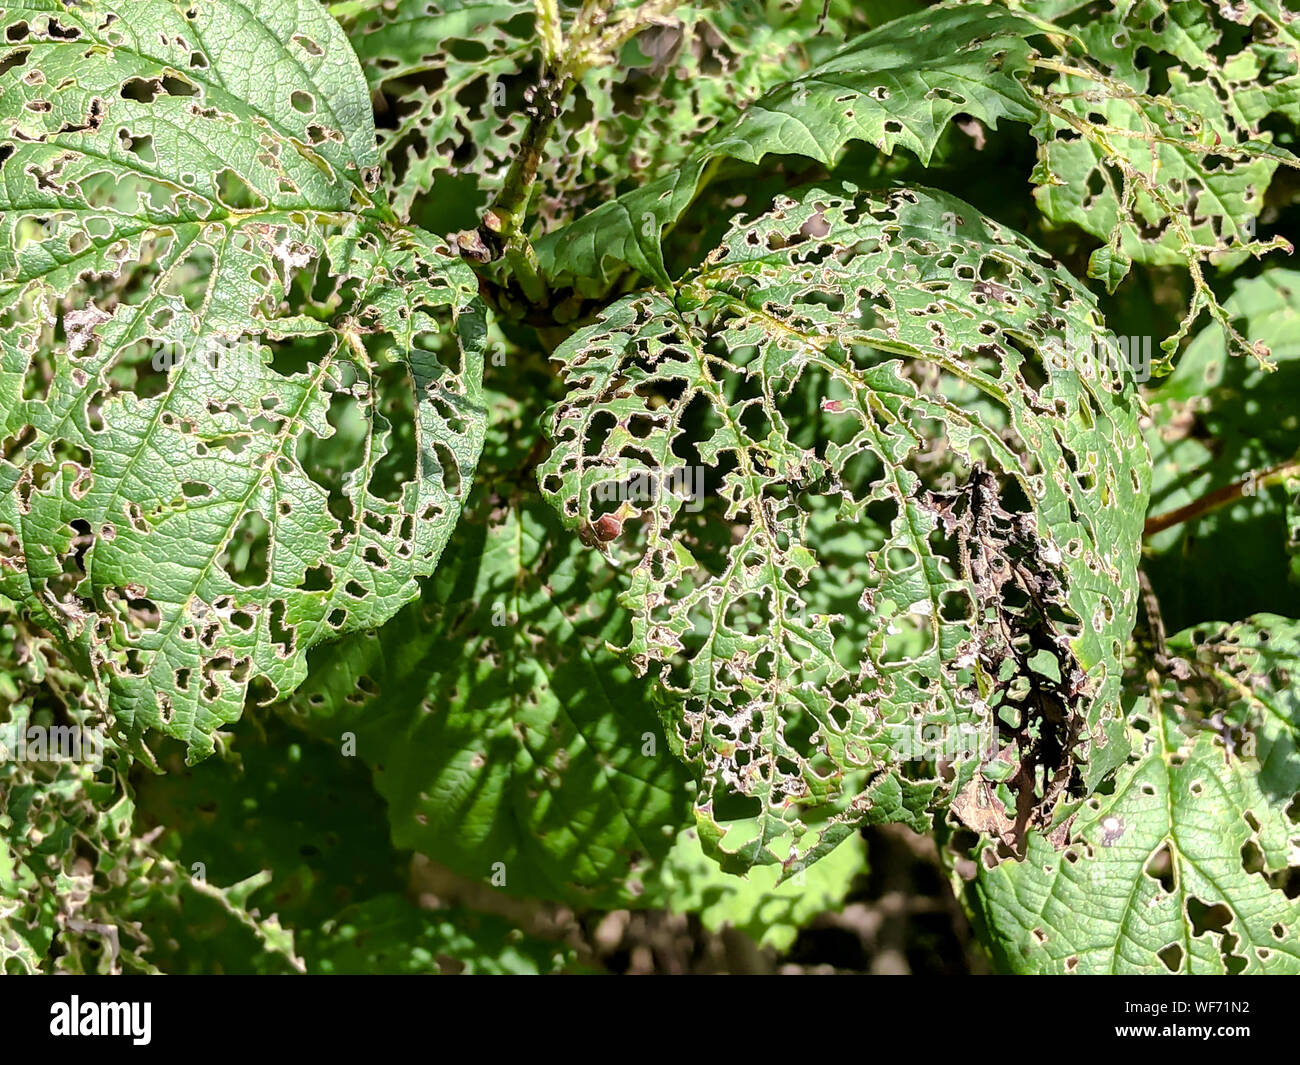 green leaves, eaten by garden pests. leaf with holes damaged by insect Stock Photo